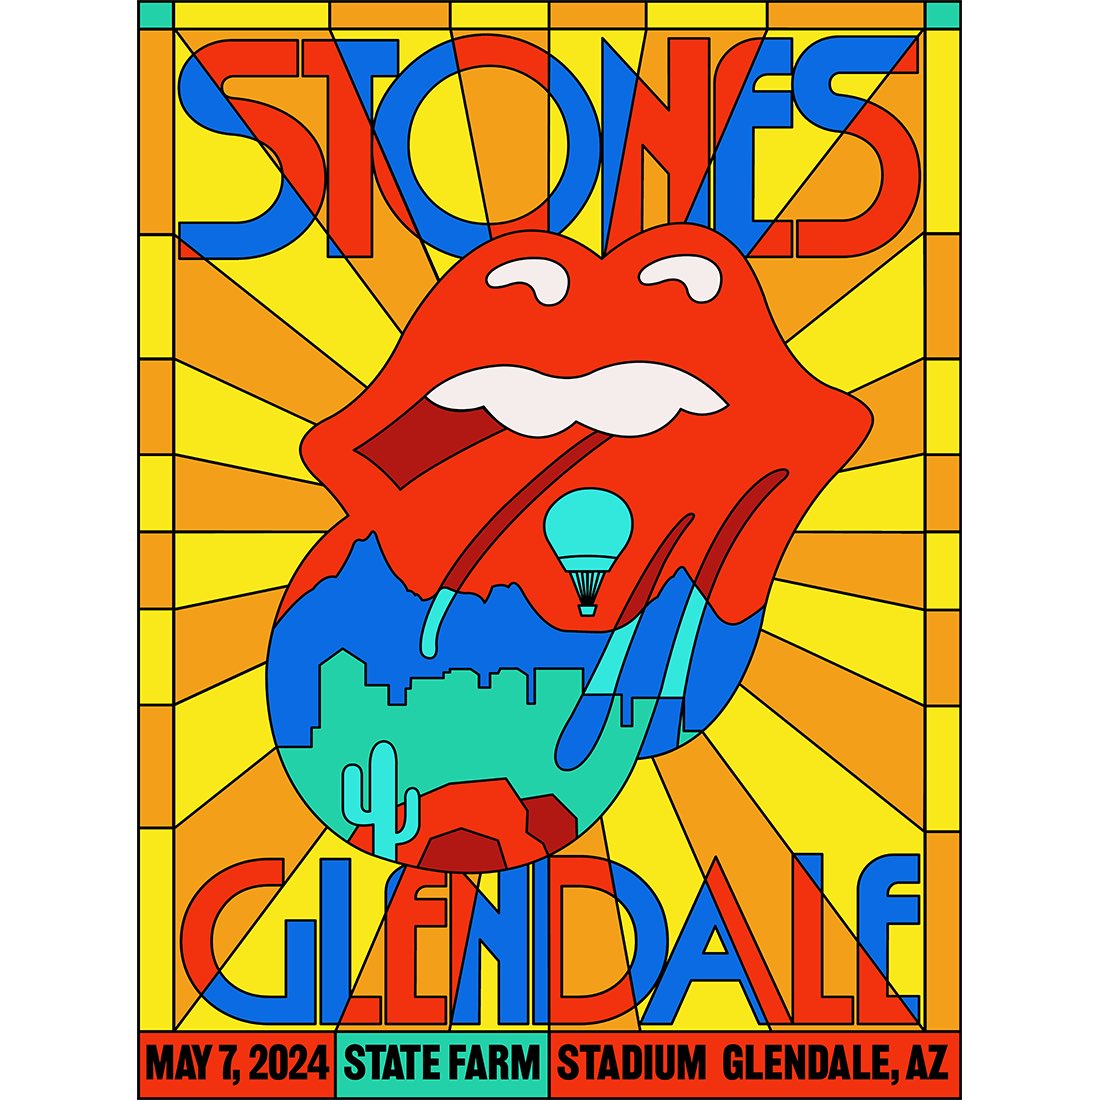 Glendale you’re up next! The Rolling Stones will be playing State Farm Stadium tomorrow night! If you’re in the area the merch stand will open early from 1pm-7pm today - next to Gate 2.